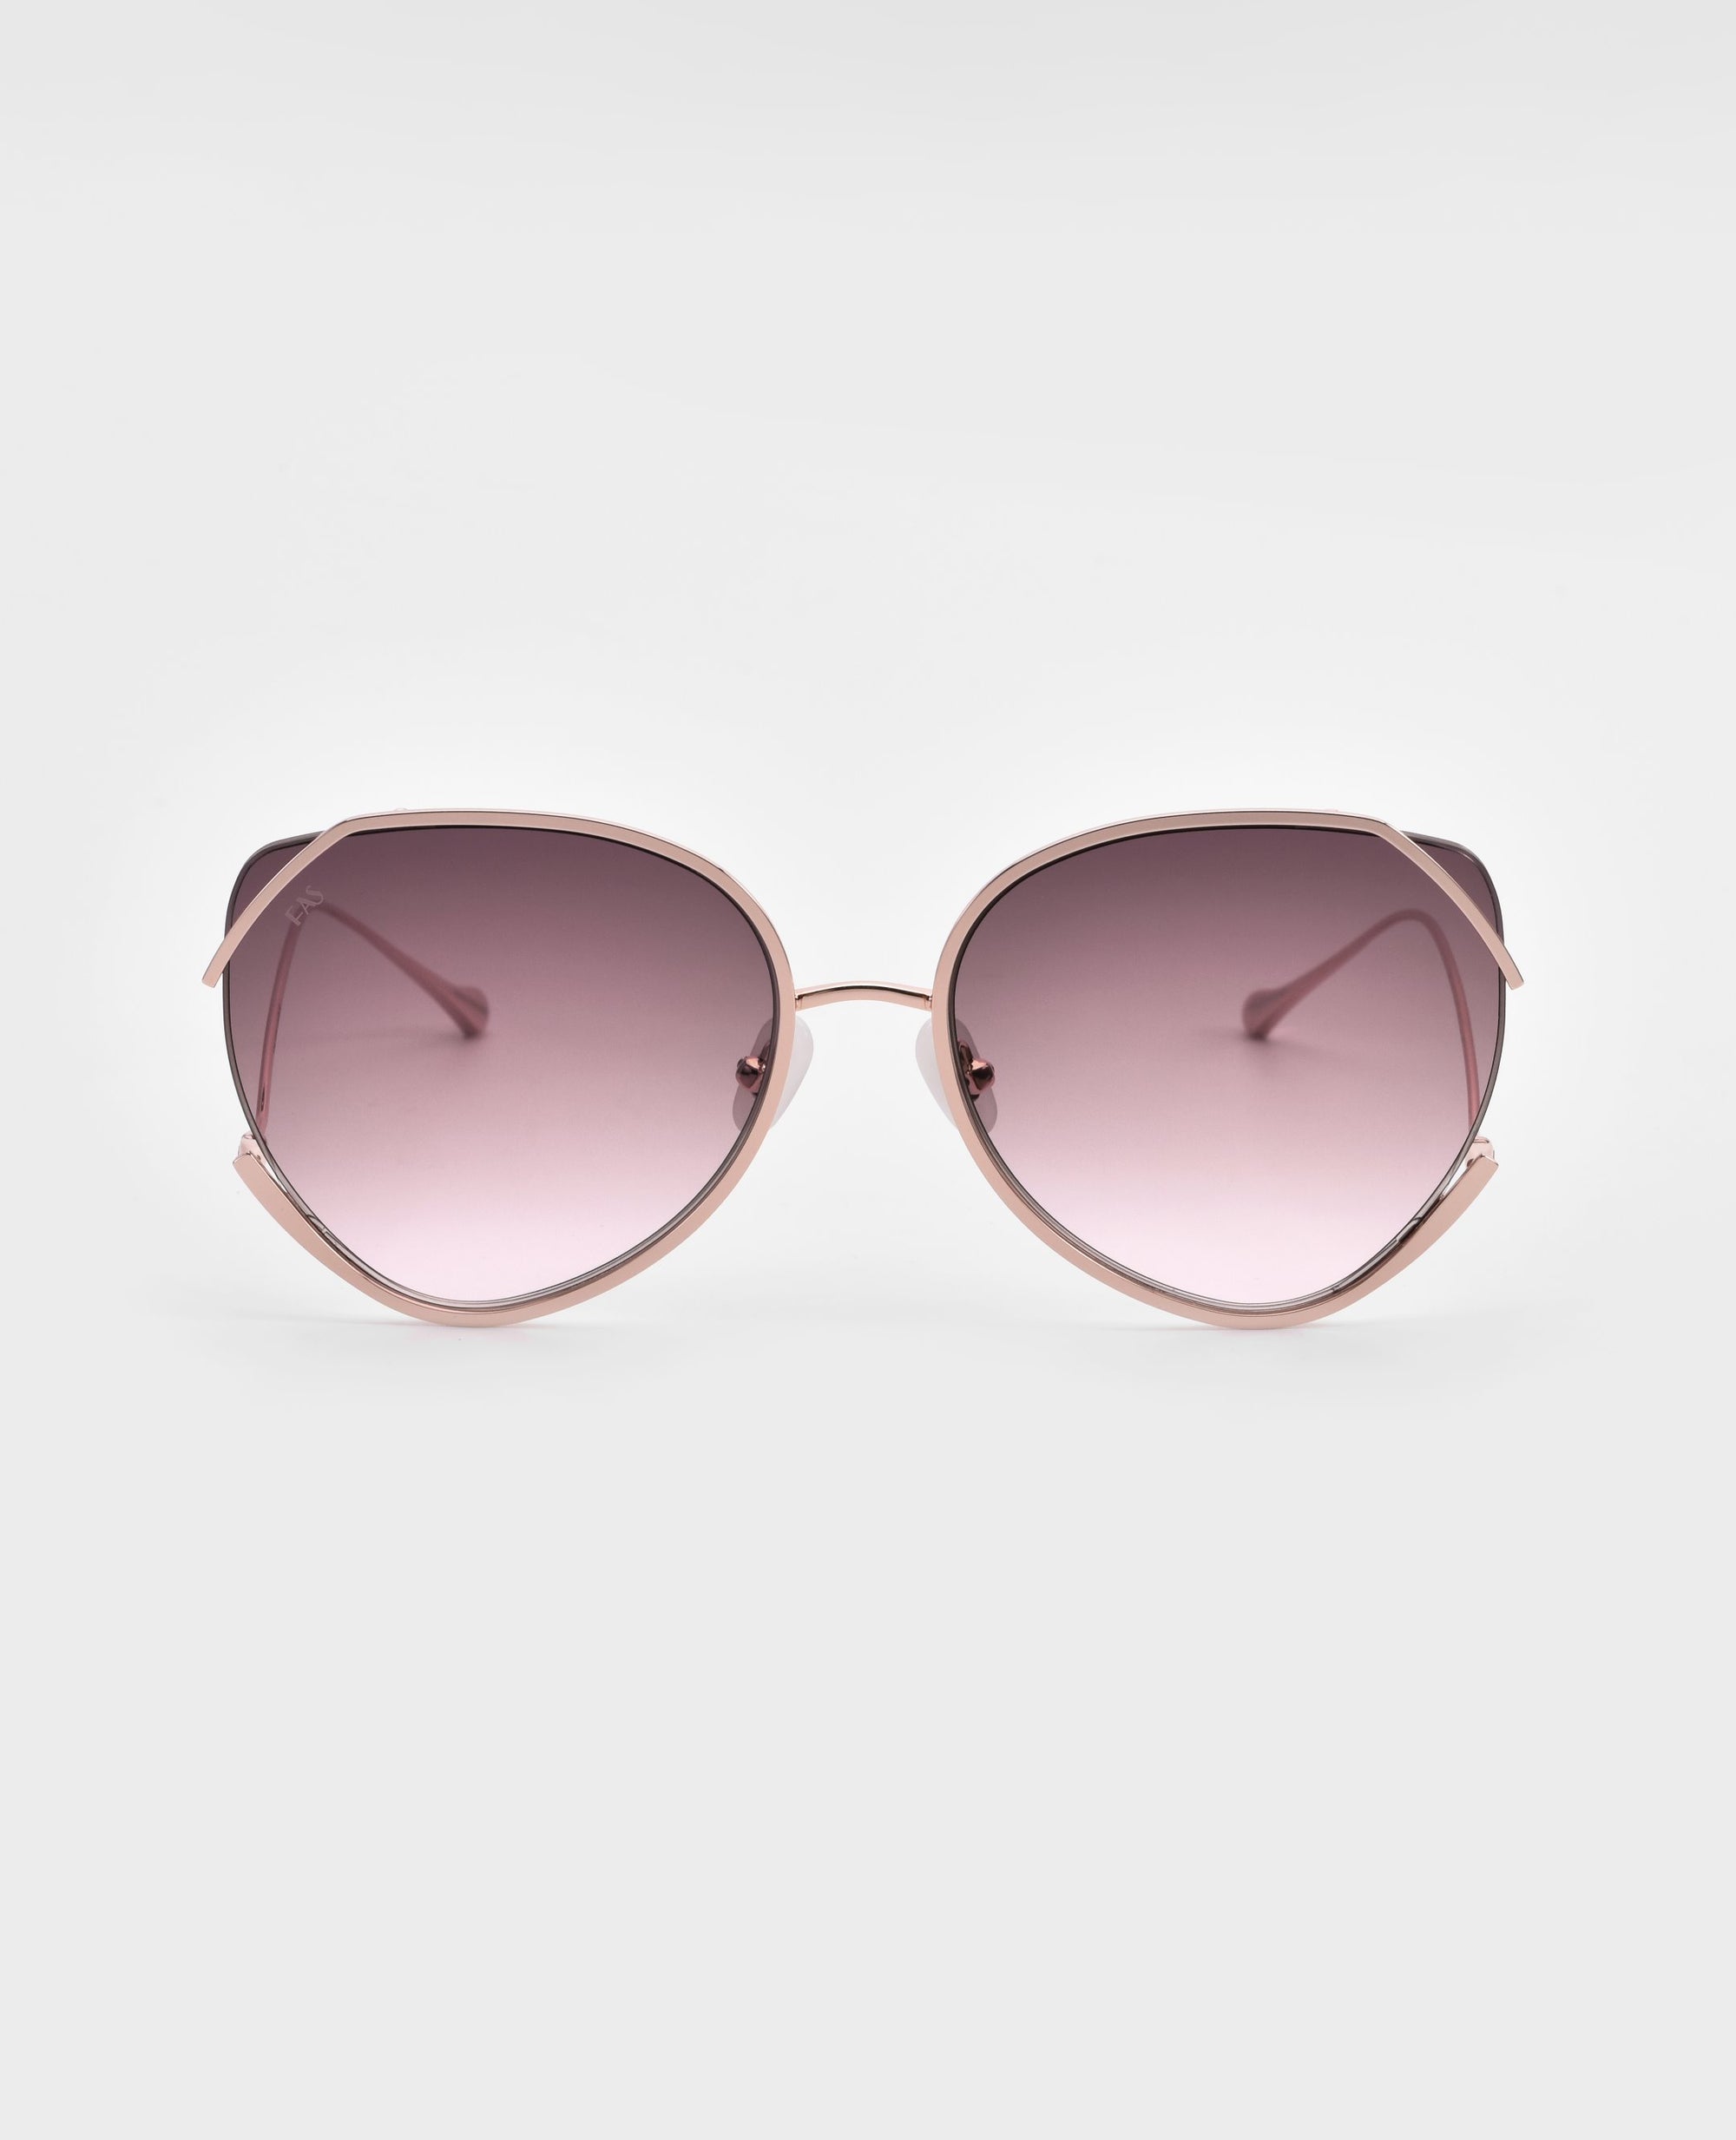 A pair of stylish Wonderland sunglasses by For Art&#39;s Sake® featuring large, round lenses with a gradient pink tint. The frame is gold-plated stainless steel with a light pink color, and the design includes emphasized curves on the edges of the lenses. Jadestone nosepads add comfort, while UVA &amp; UVB protection ensures your eyes stay safe.